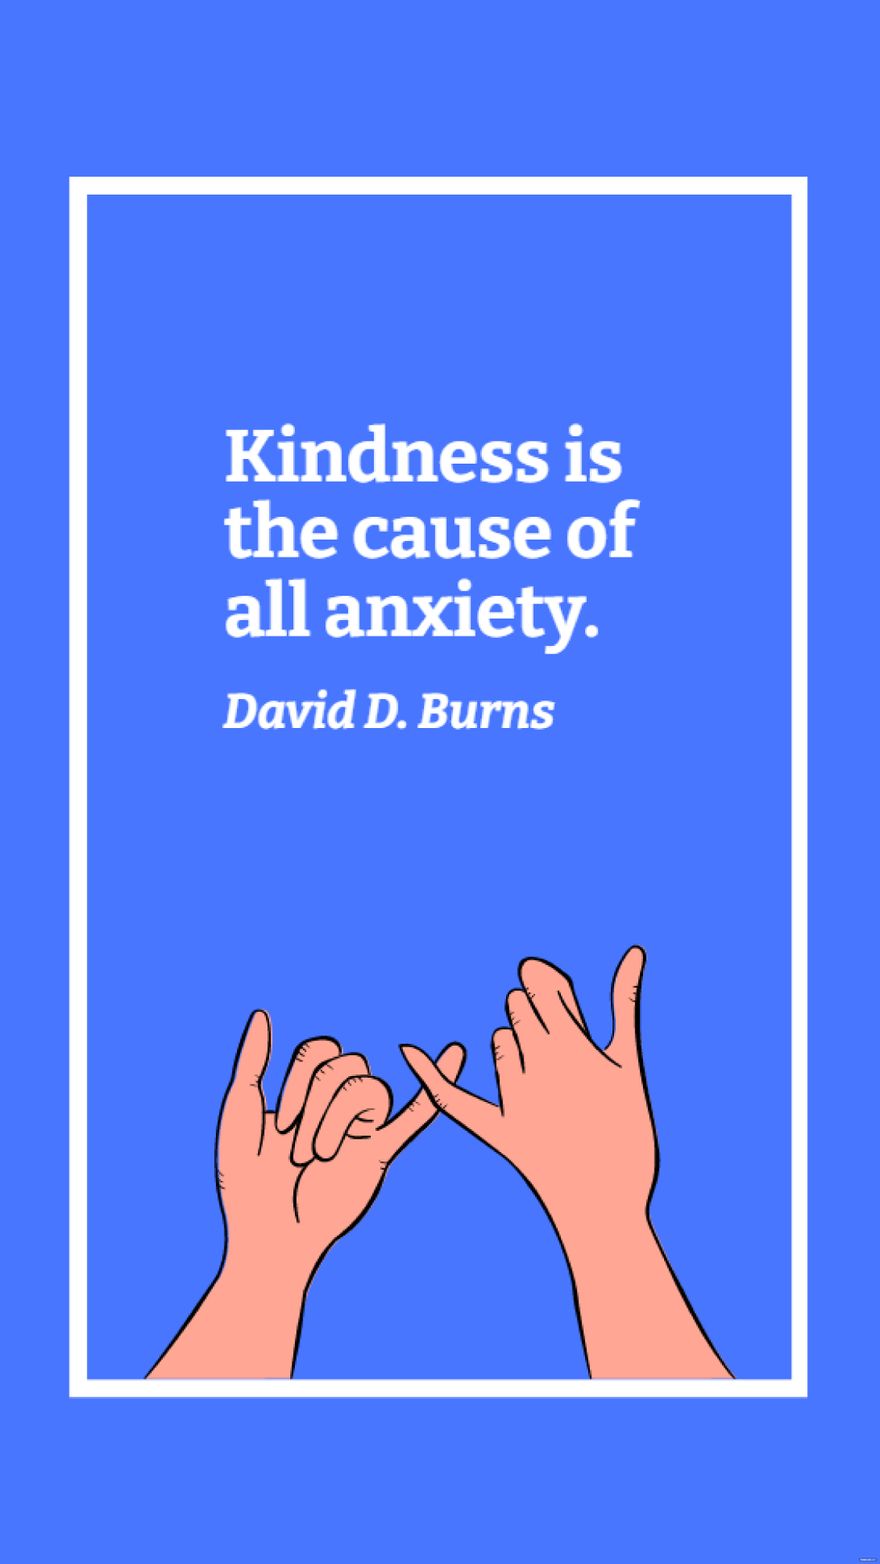 David D. Burns - Kindness is the cause of all anxiety. in JPG